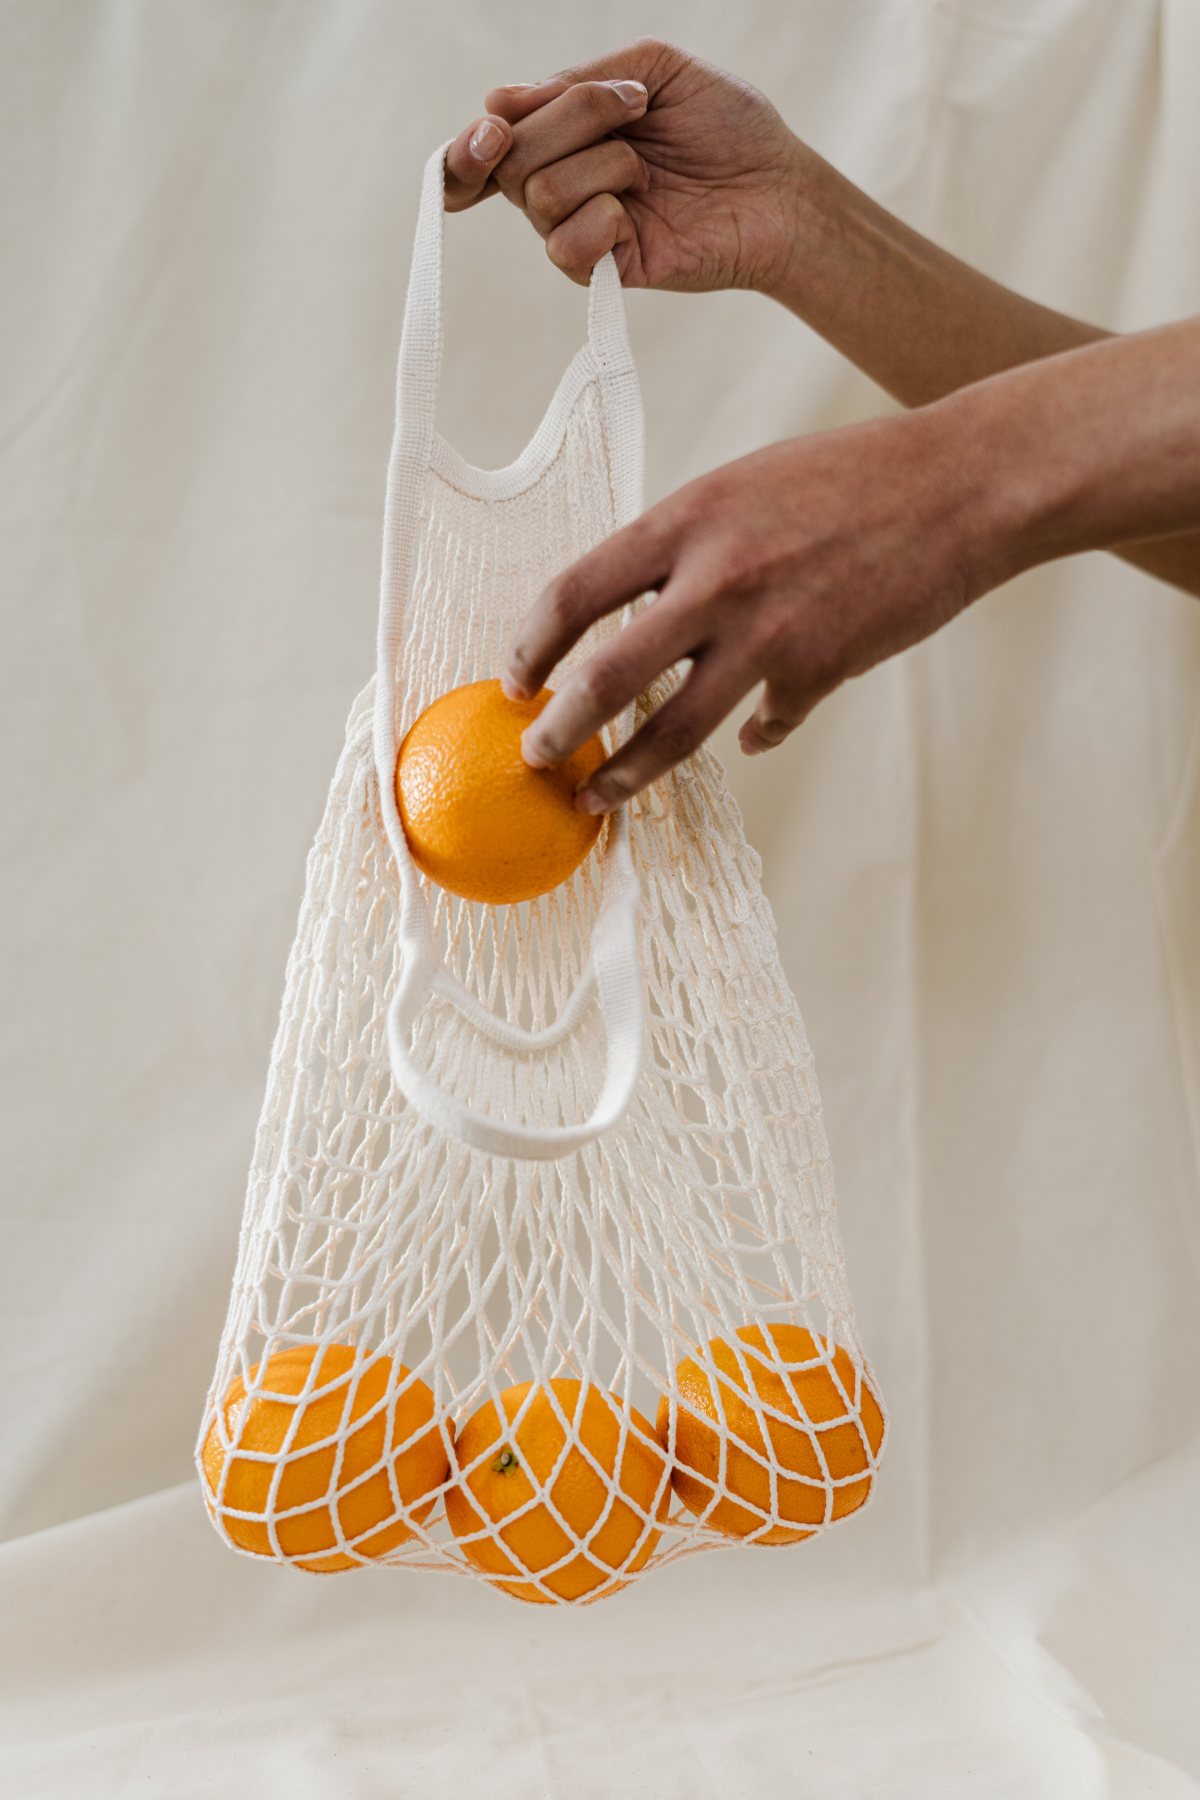 fruits that are in season in winter putting oranges in a bag